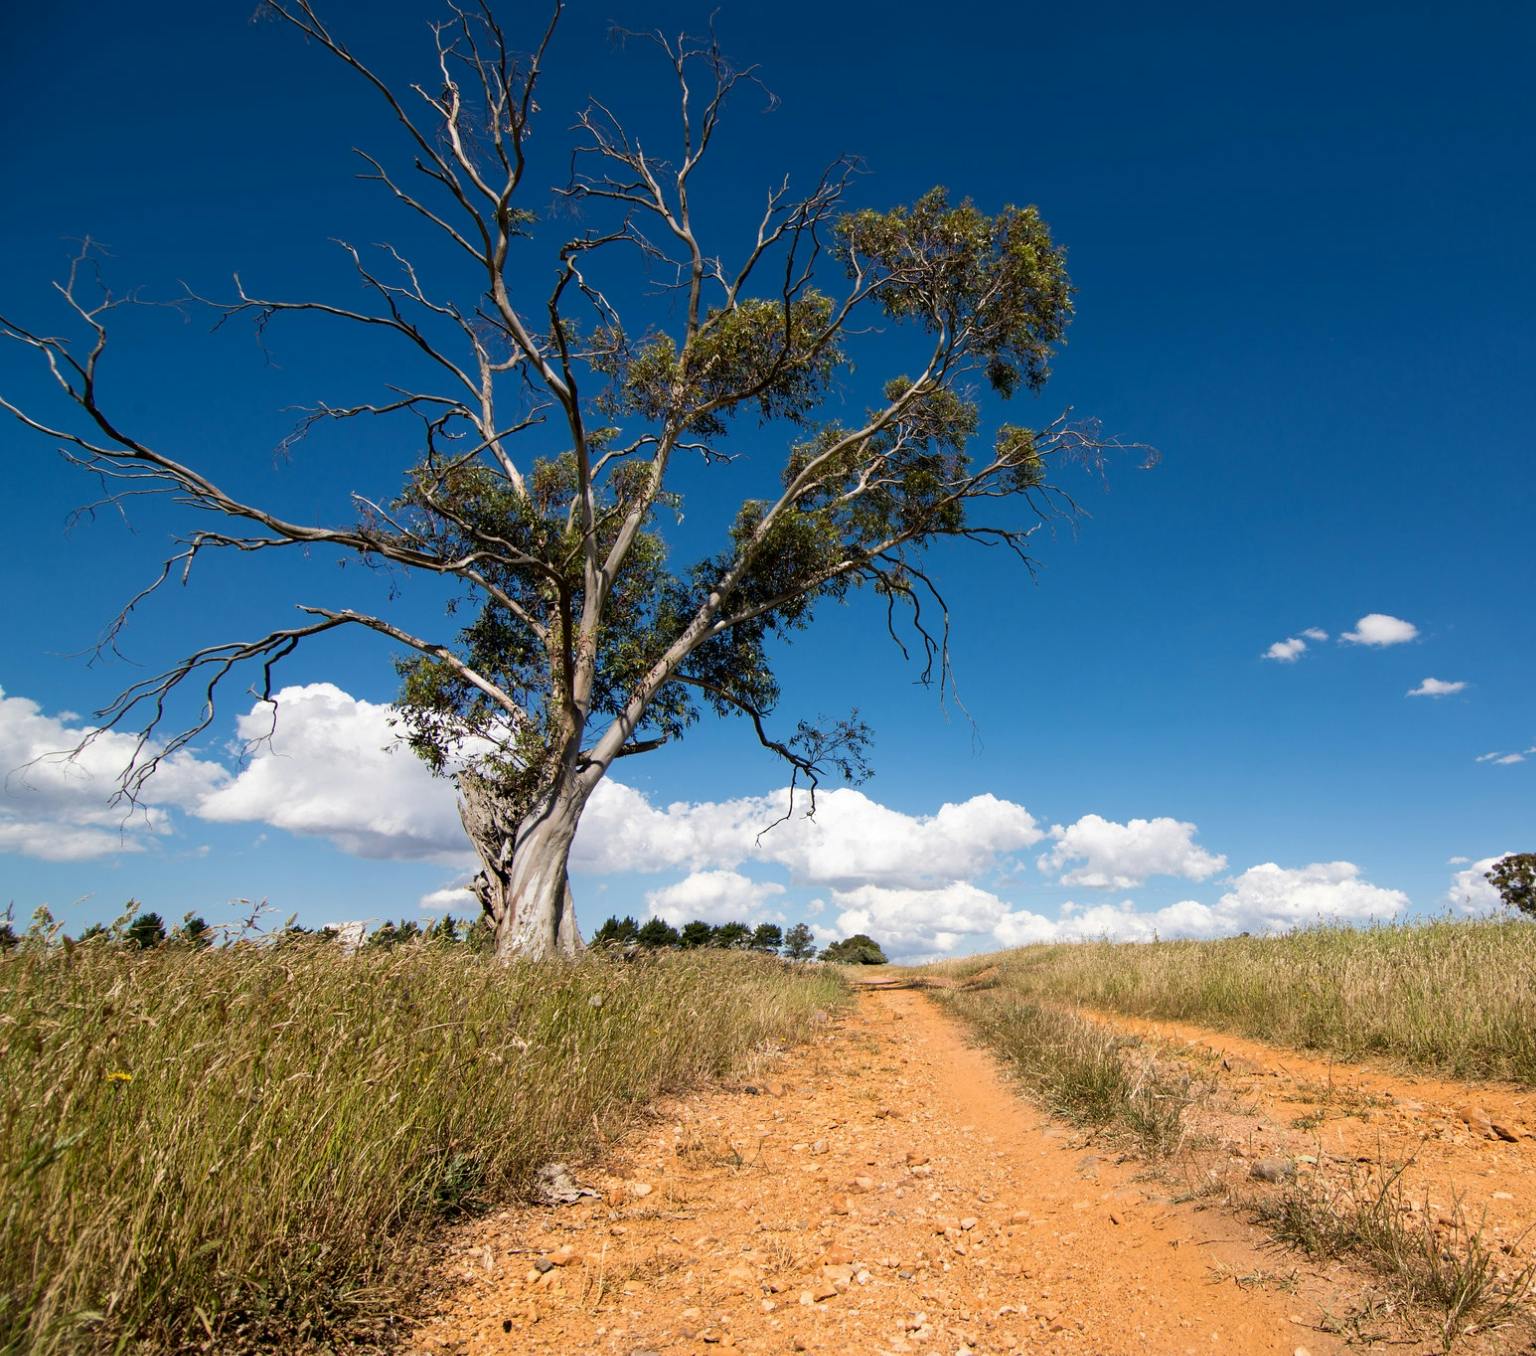 red dirt road leading into the distance with a large tree to the left of the road and long grass next to the road